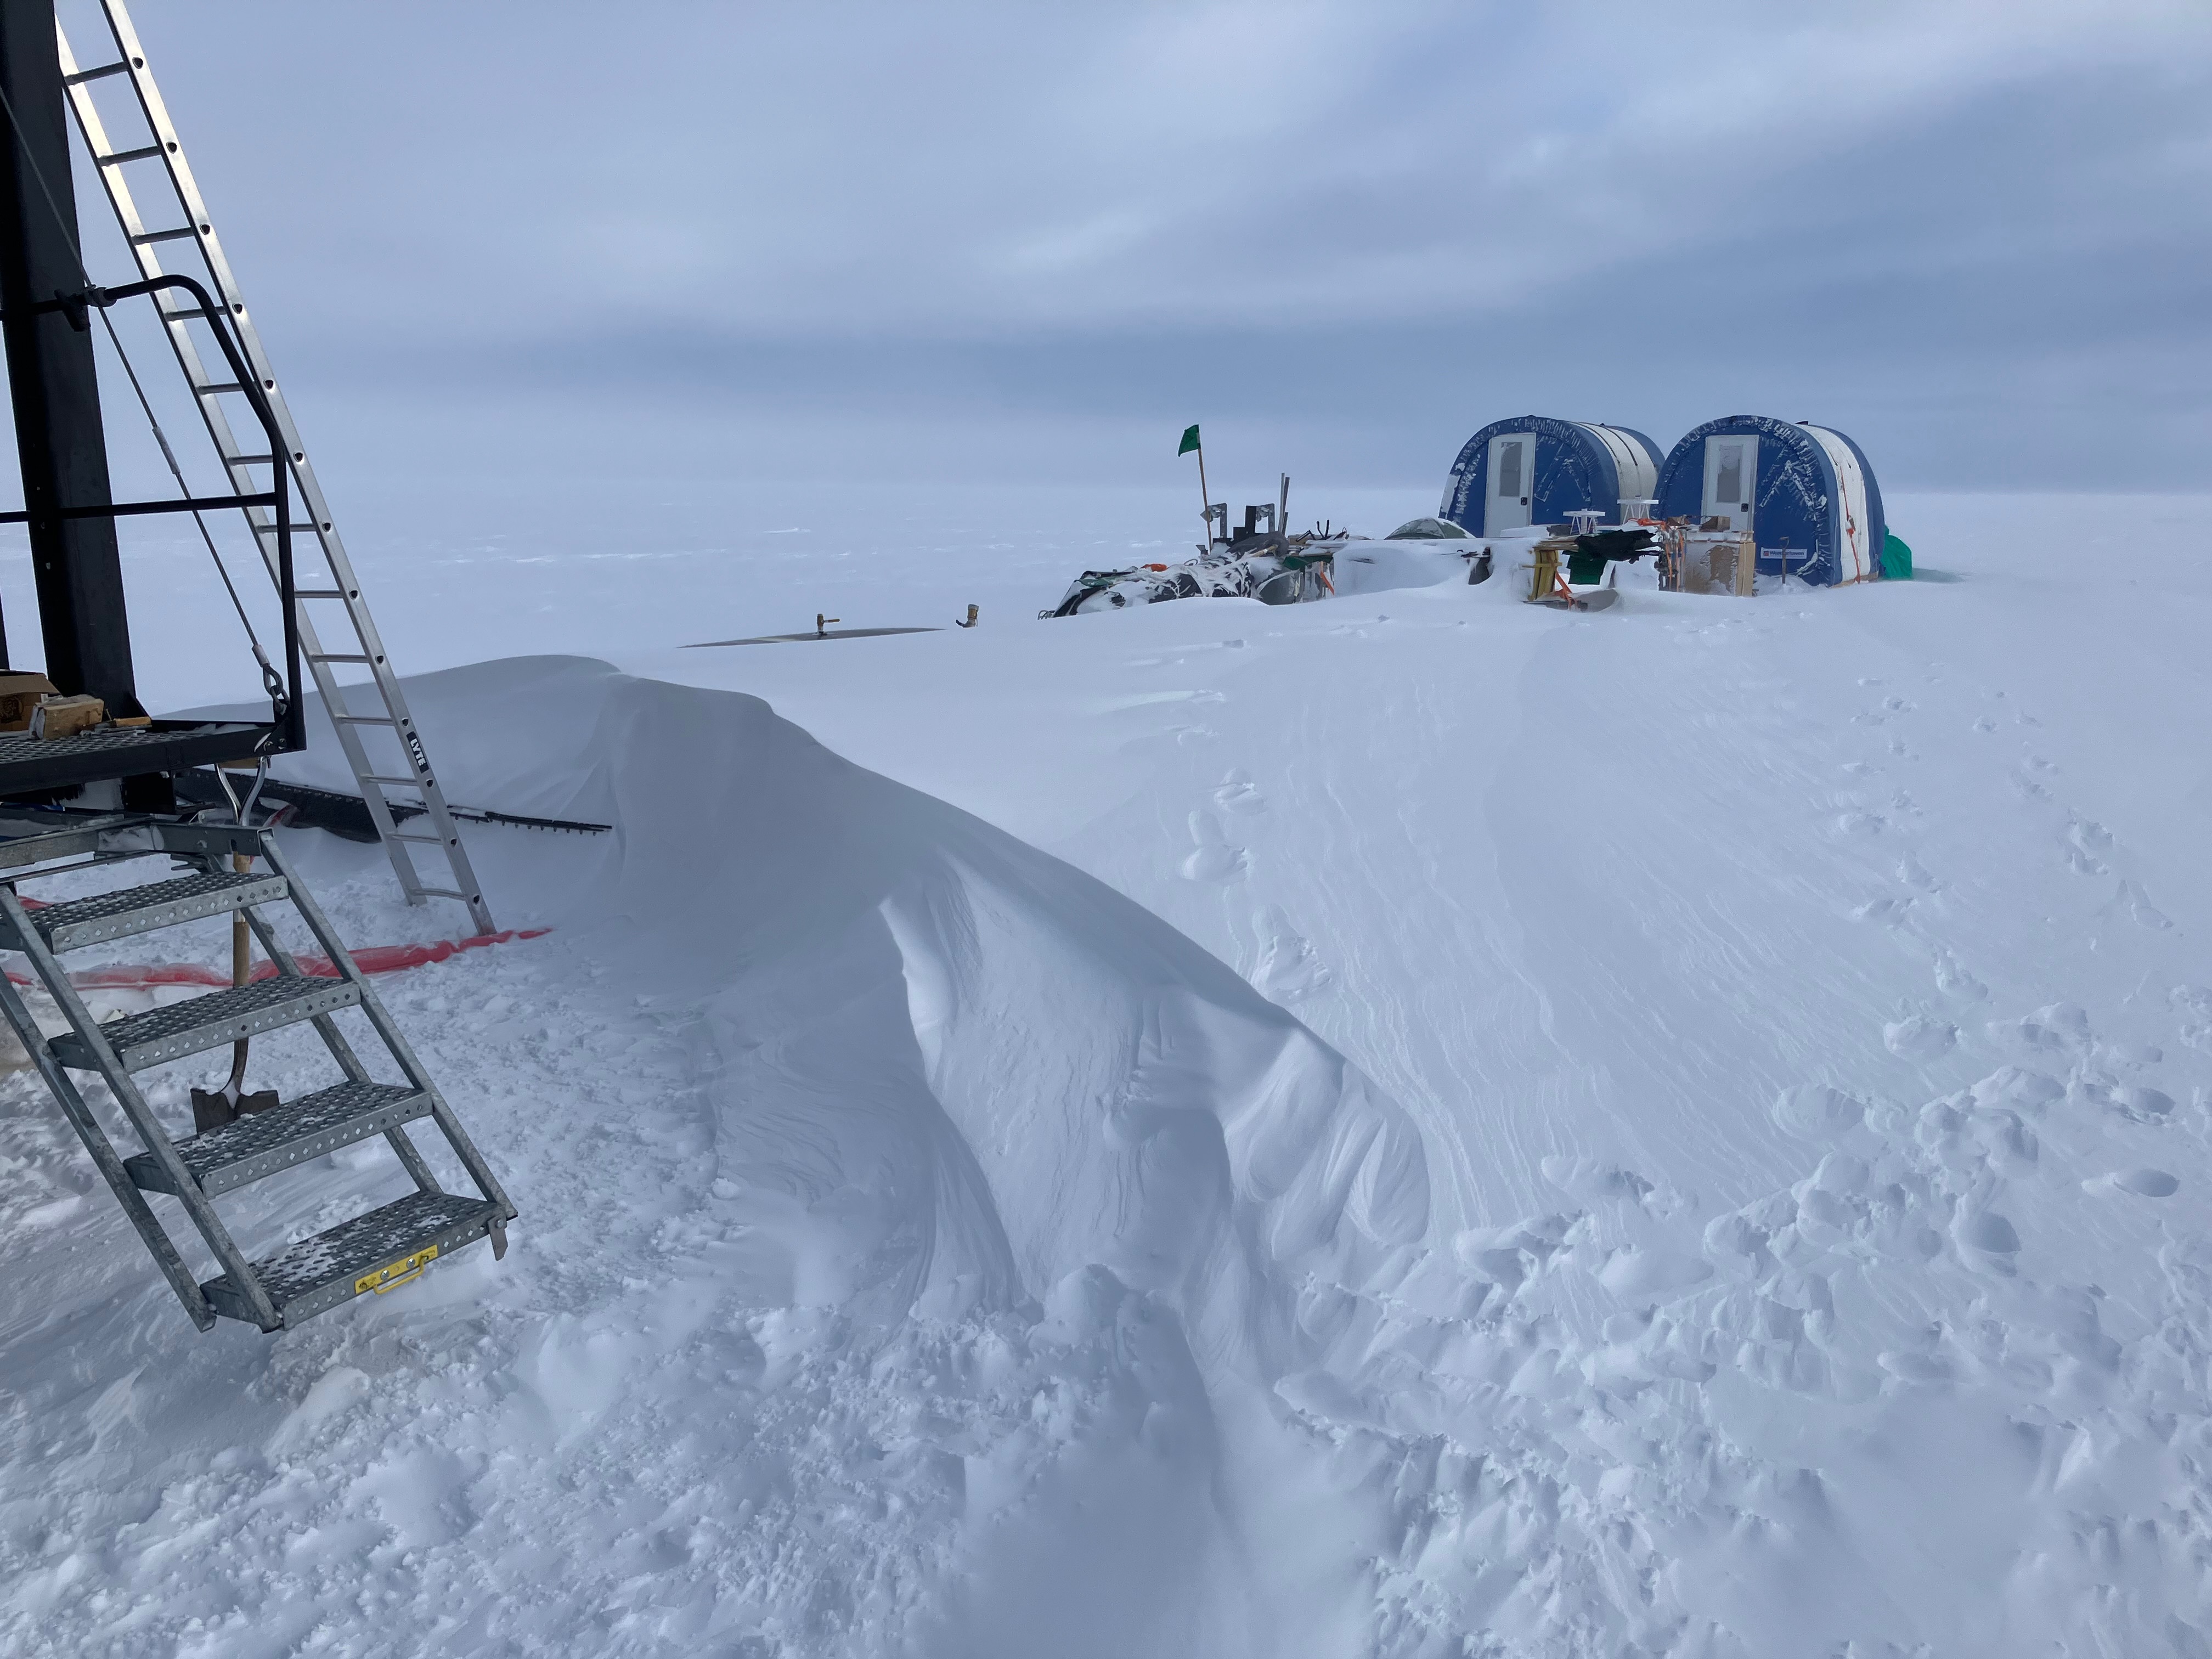 Camping beside the vibroseis traverse equipment on Thwaites Glacier. Photo credit Ole Zeising